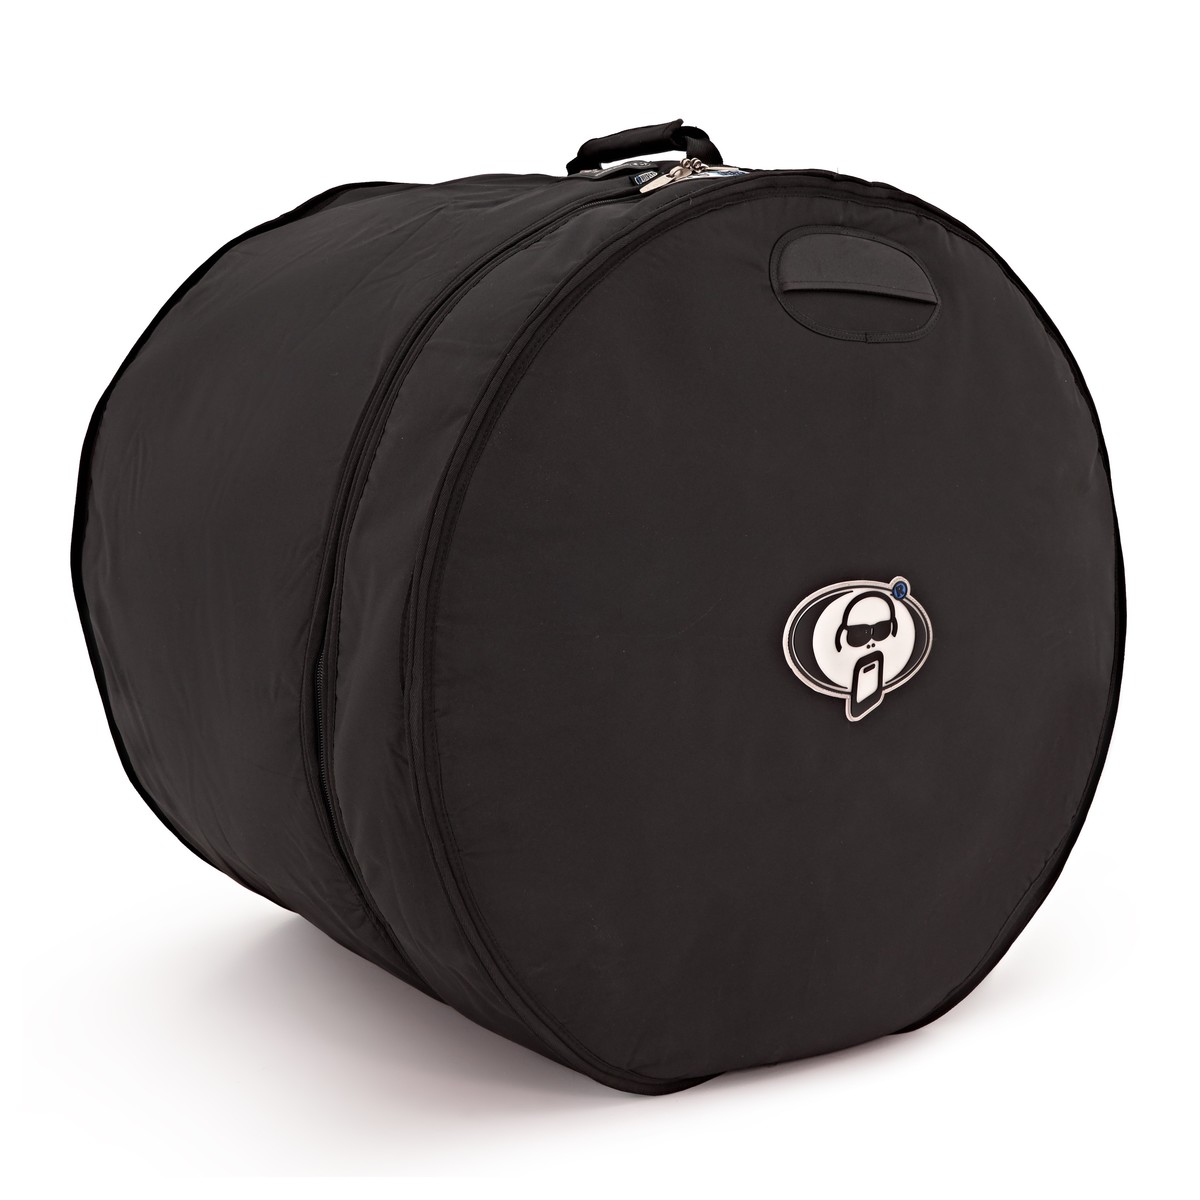 An image of Protection Racket 26x22 Bass Drum Case | PMT Online